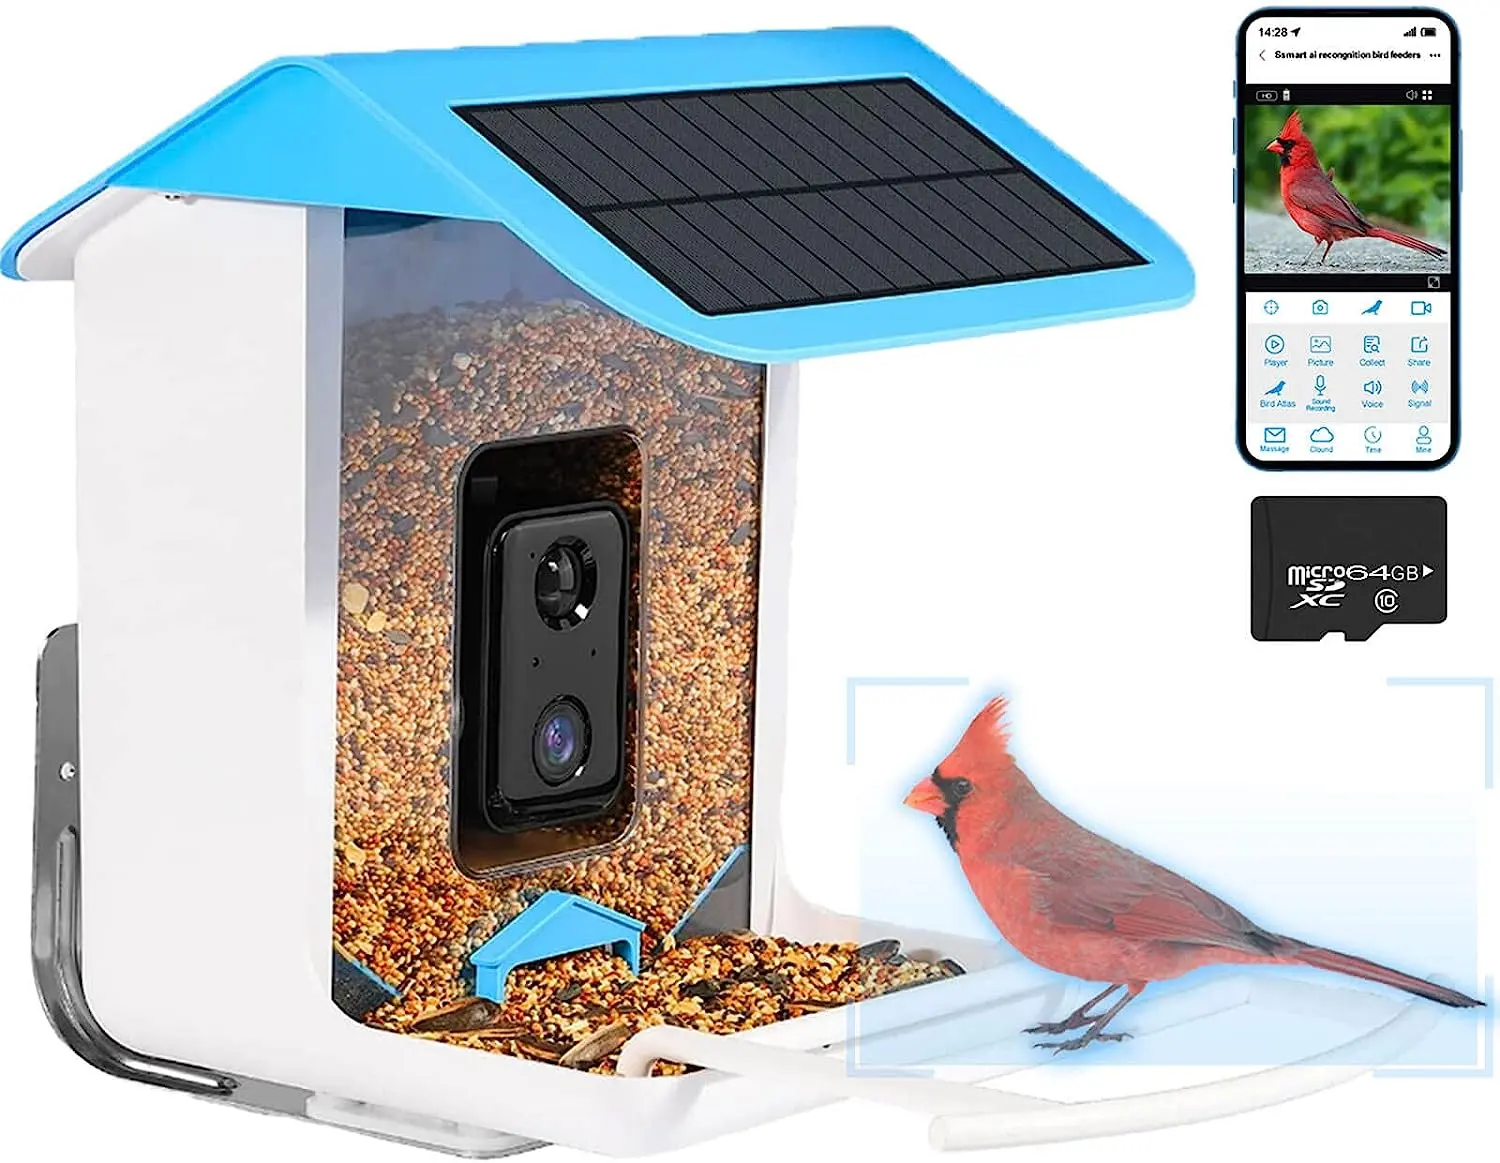 Infrared Light Squirrel-proof Food and Drinker Humming Bird Feeder with Camera Petdom Automatically Take Video 940nm Plastic TT